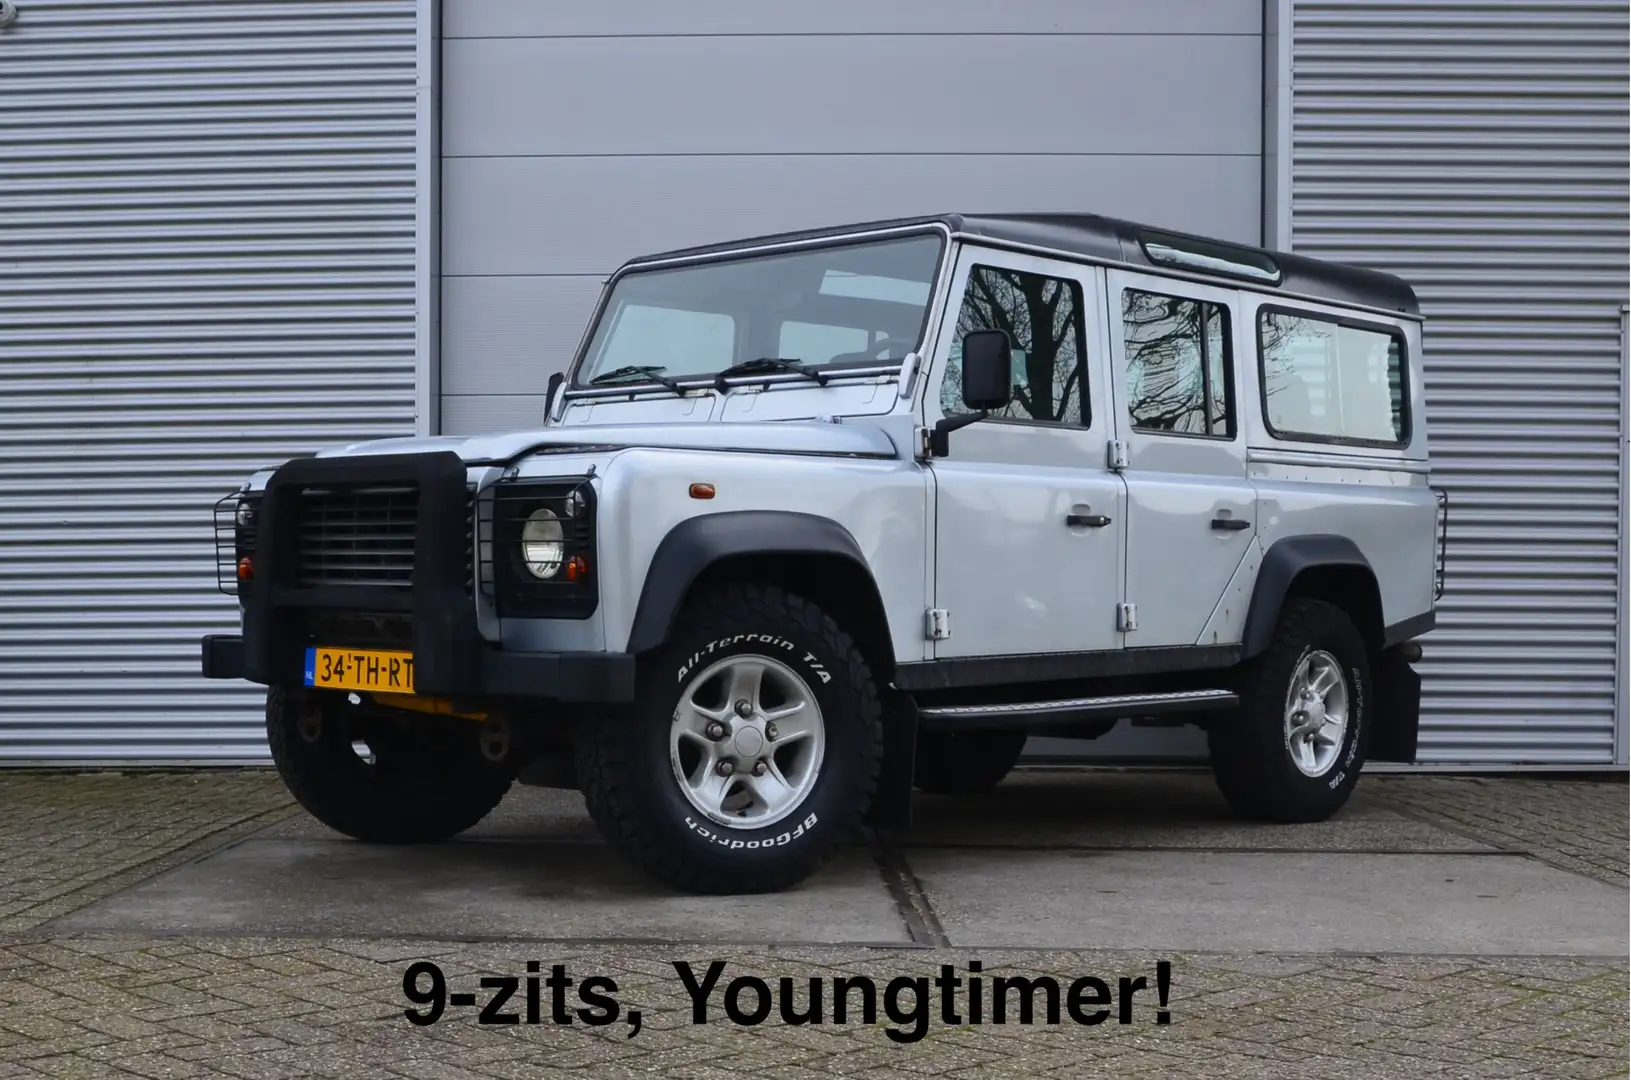 Land Rover Defender 2.5 TD5 110 SW XTech 9-zits, Youngtimer! fin. 542, Grey - 1